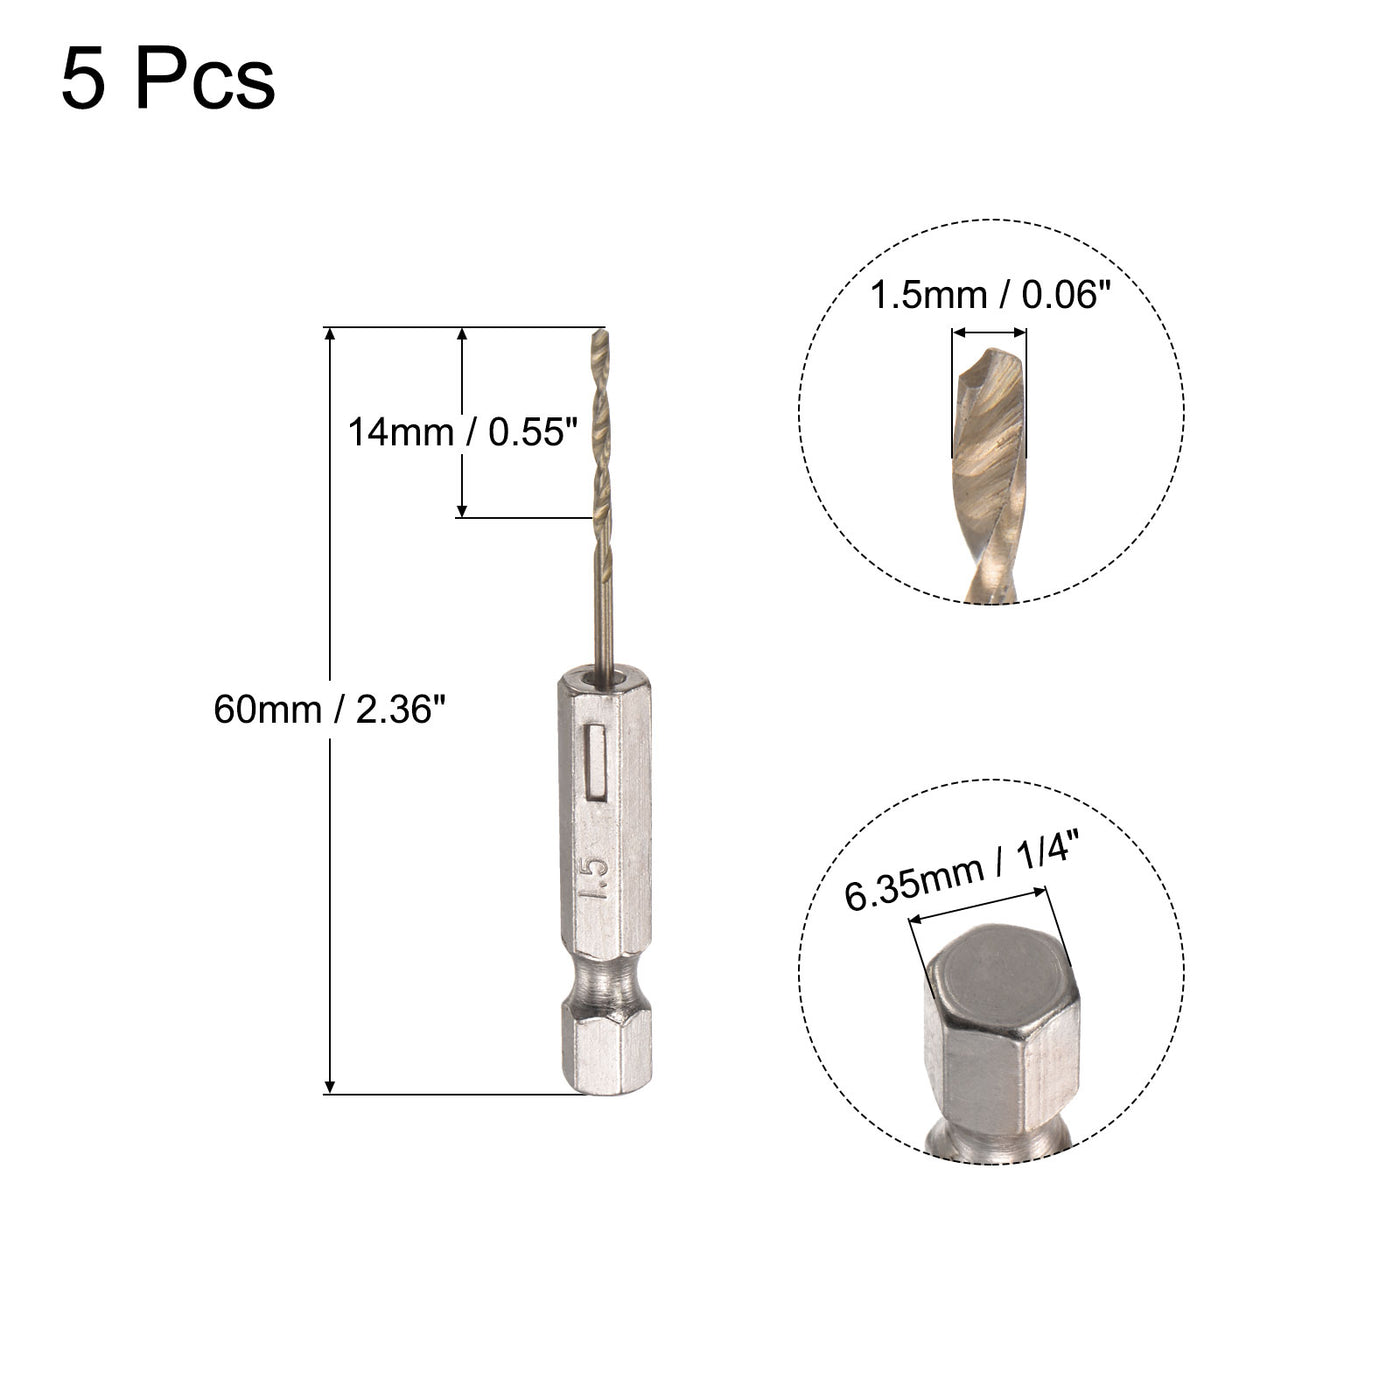 Uxcell Uxcell 5Pcs 1.5mm High Speed Steel Twist Drill Bit with Hex Shank 60mm Length